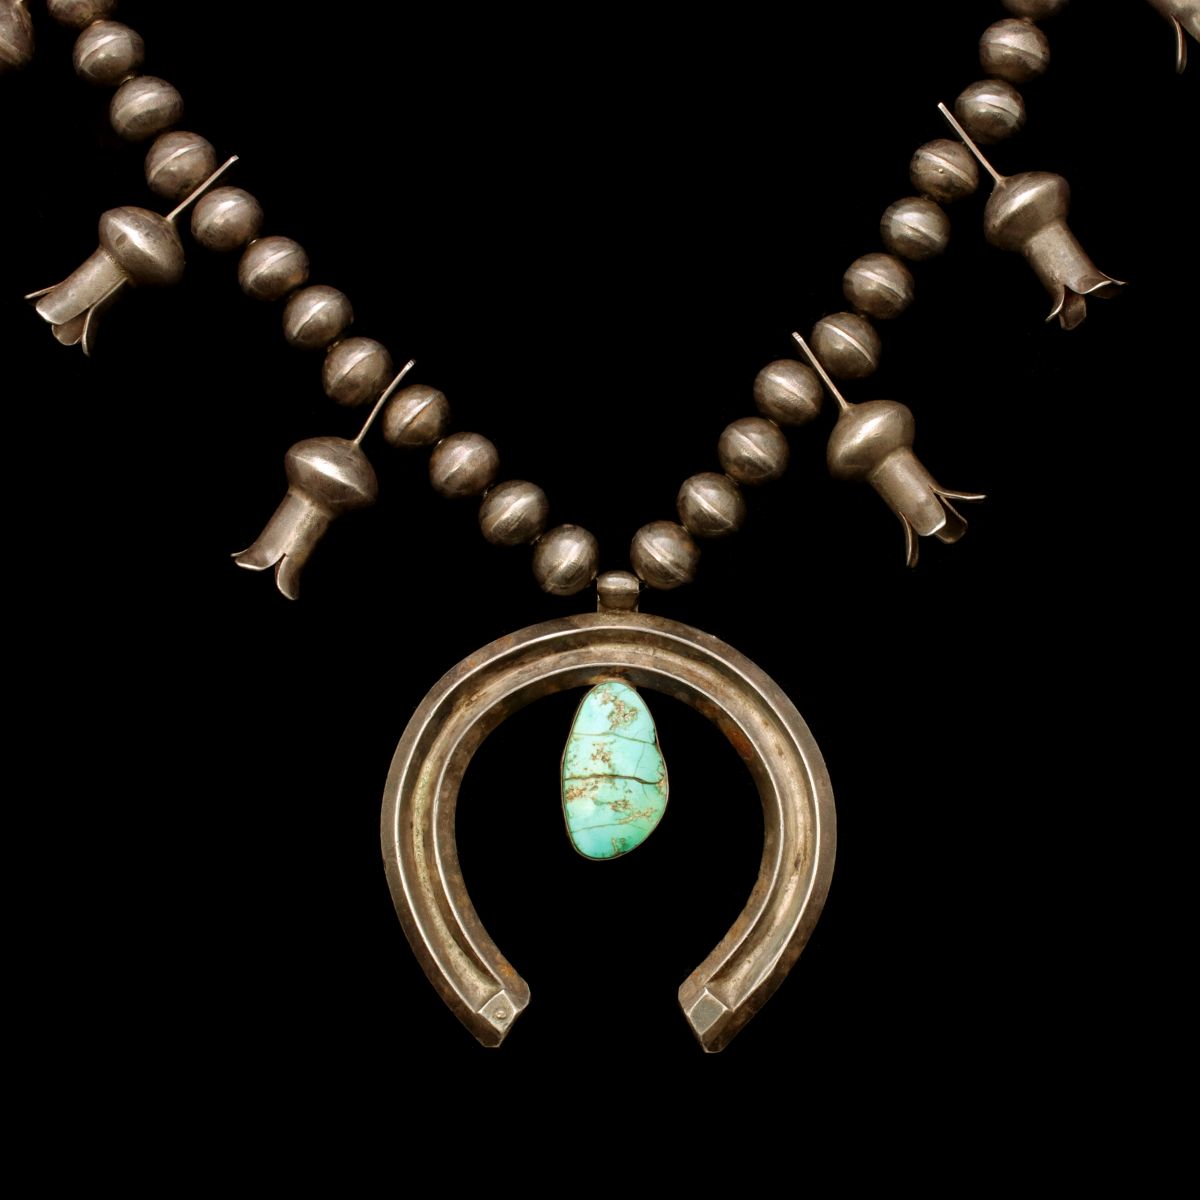 A GOOD NAVAJO SQUASH BLOSSOM NECKLACE WITH TURQUOISE